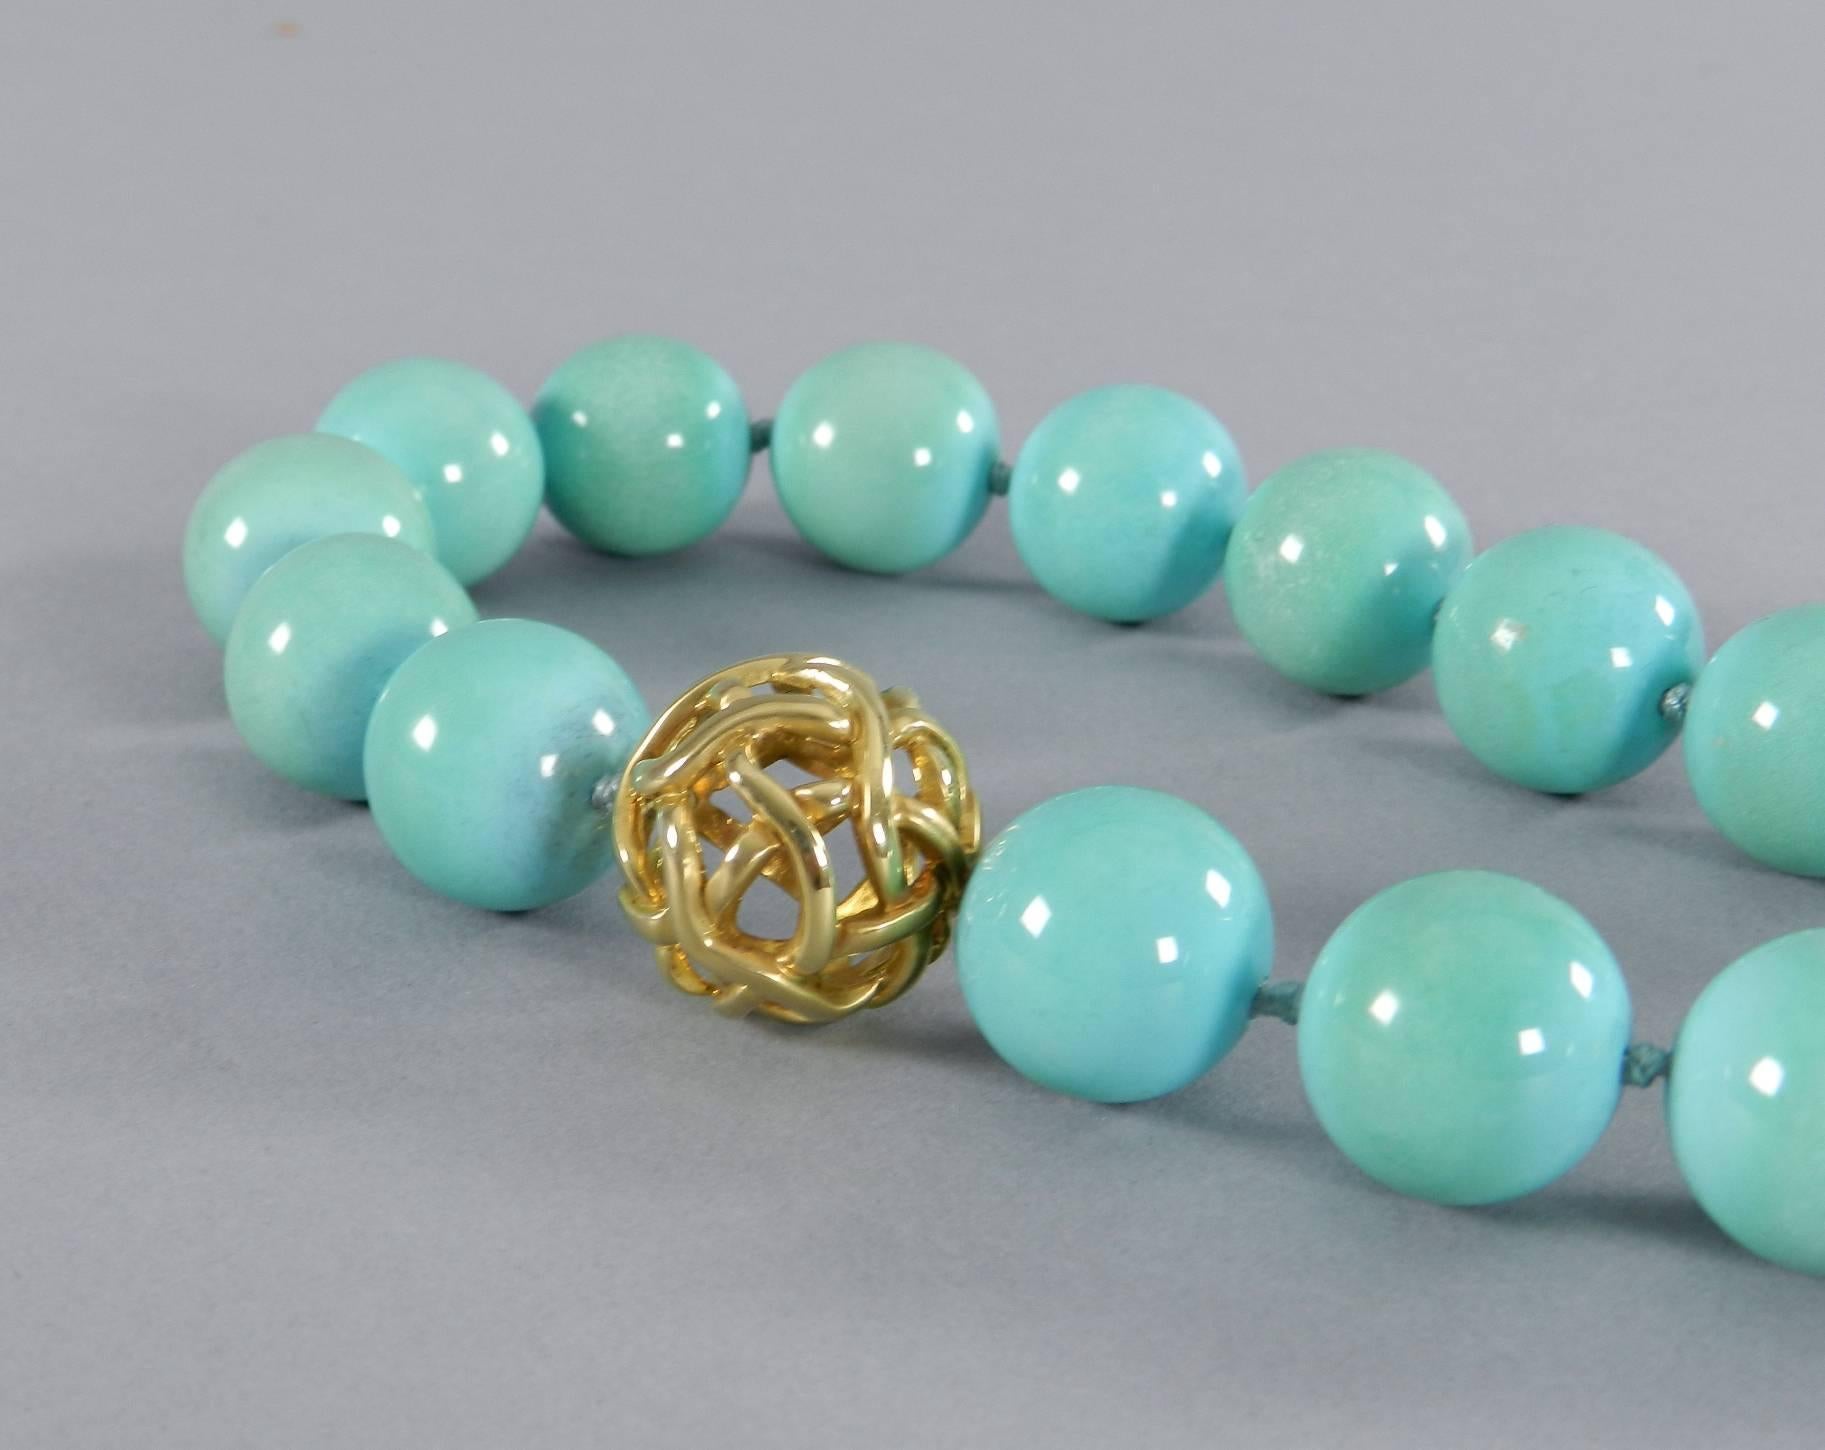 Women's Angela Cummings Turquoise Bead Necklace with Gold Clasp